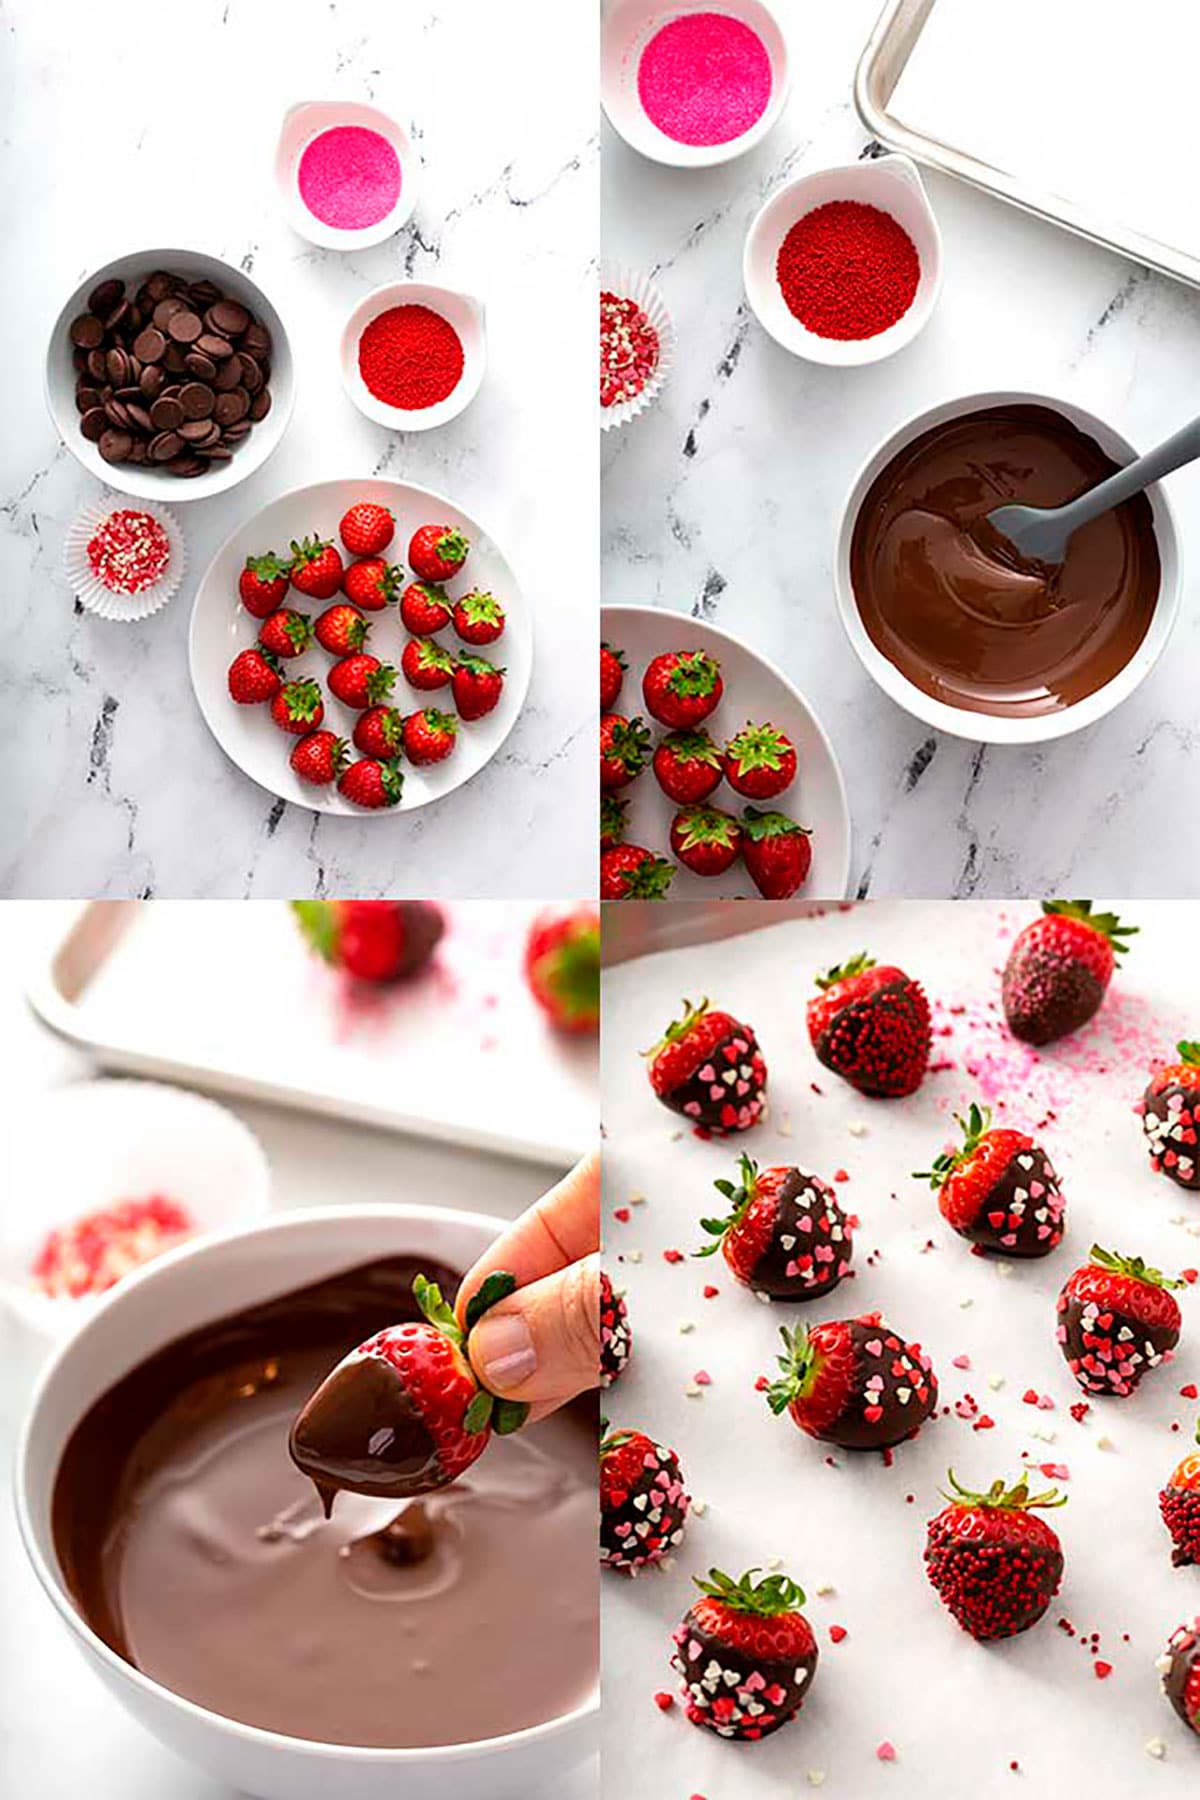 Step by step photos on how to make chocolate covered strawberries